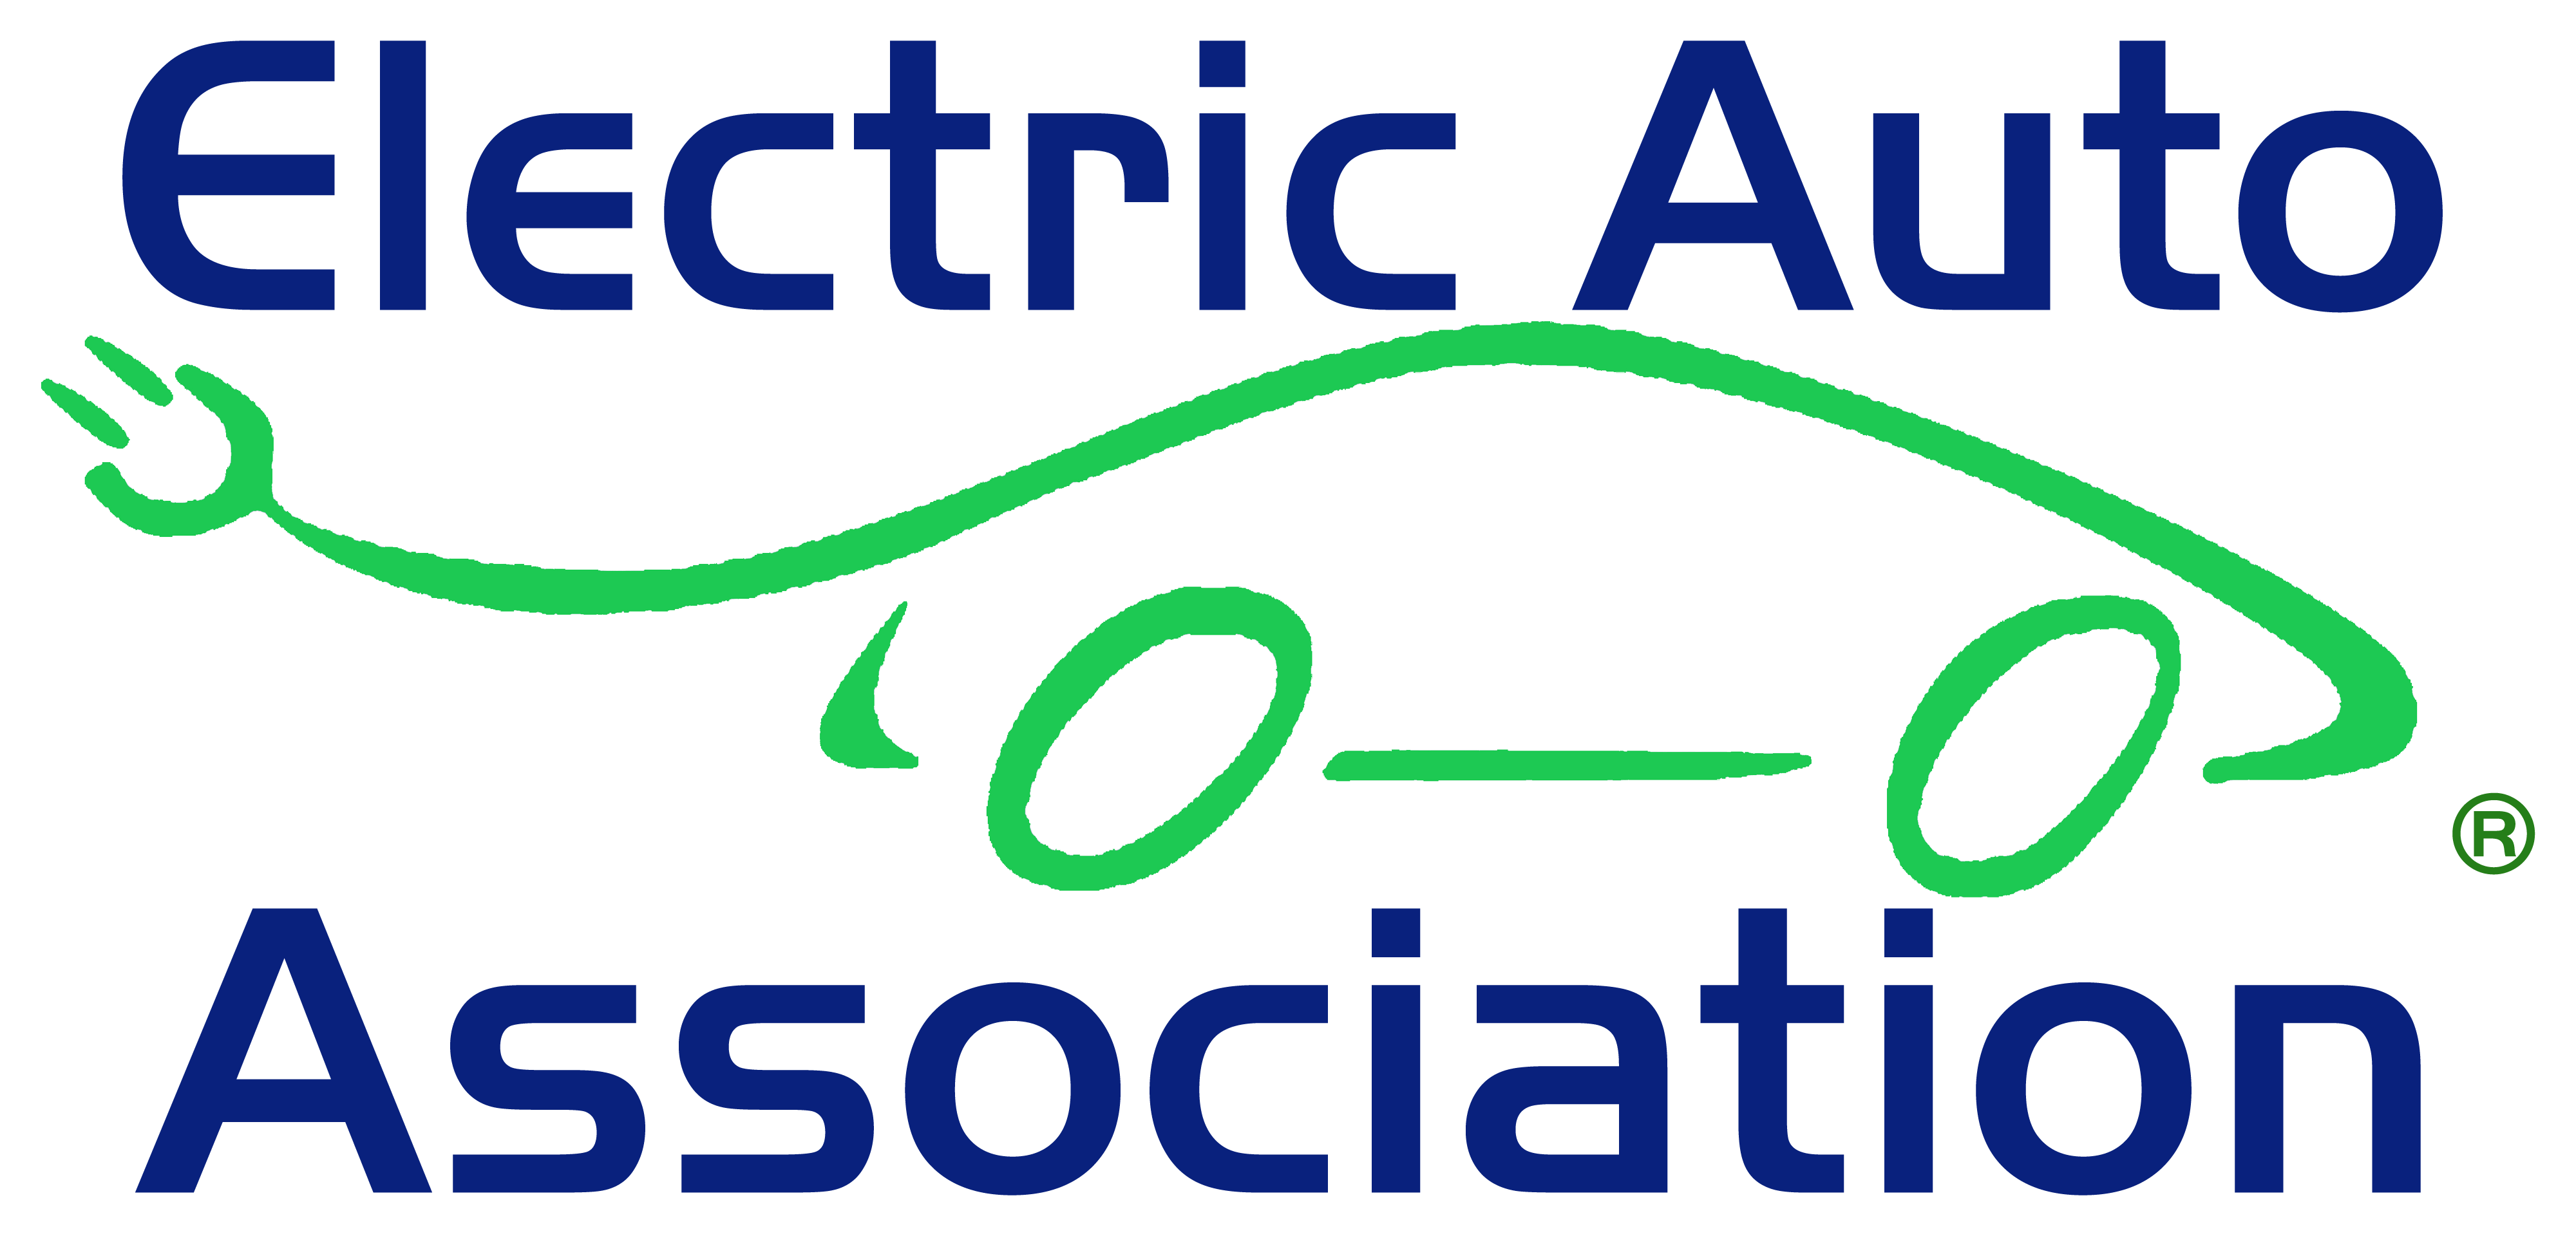 Electric Car Logo - National Drive Electric Week - Resources